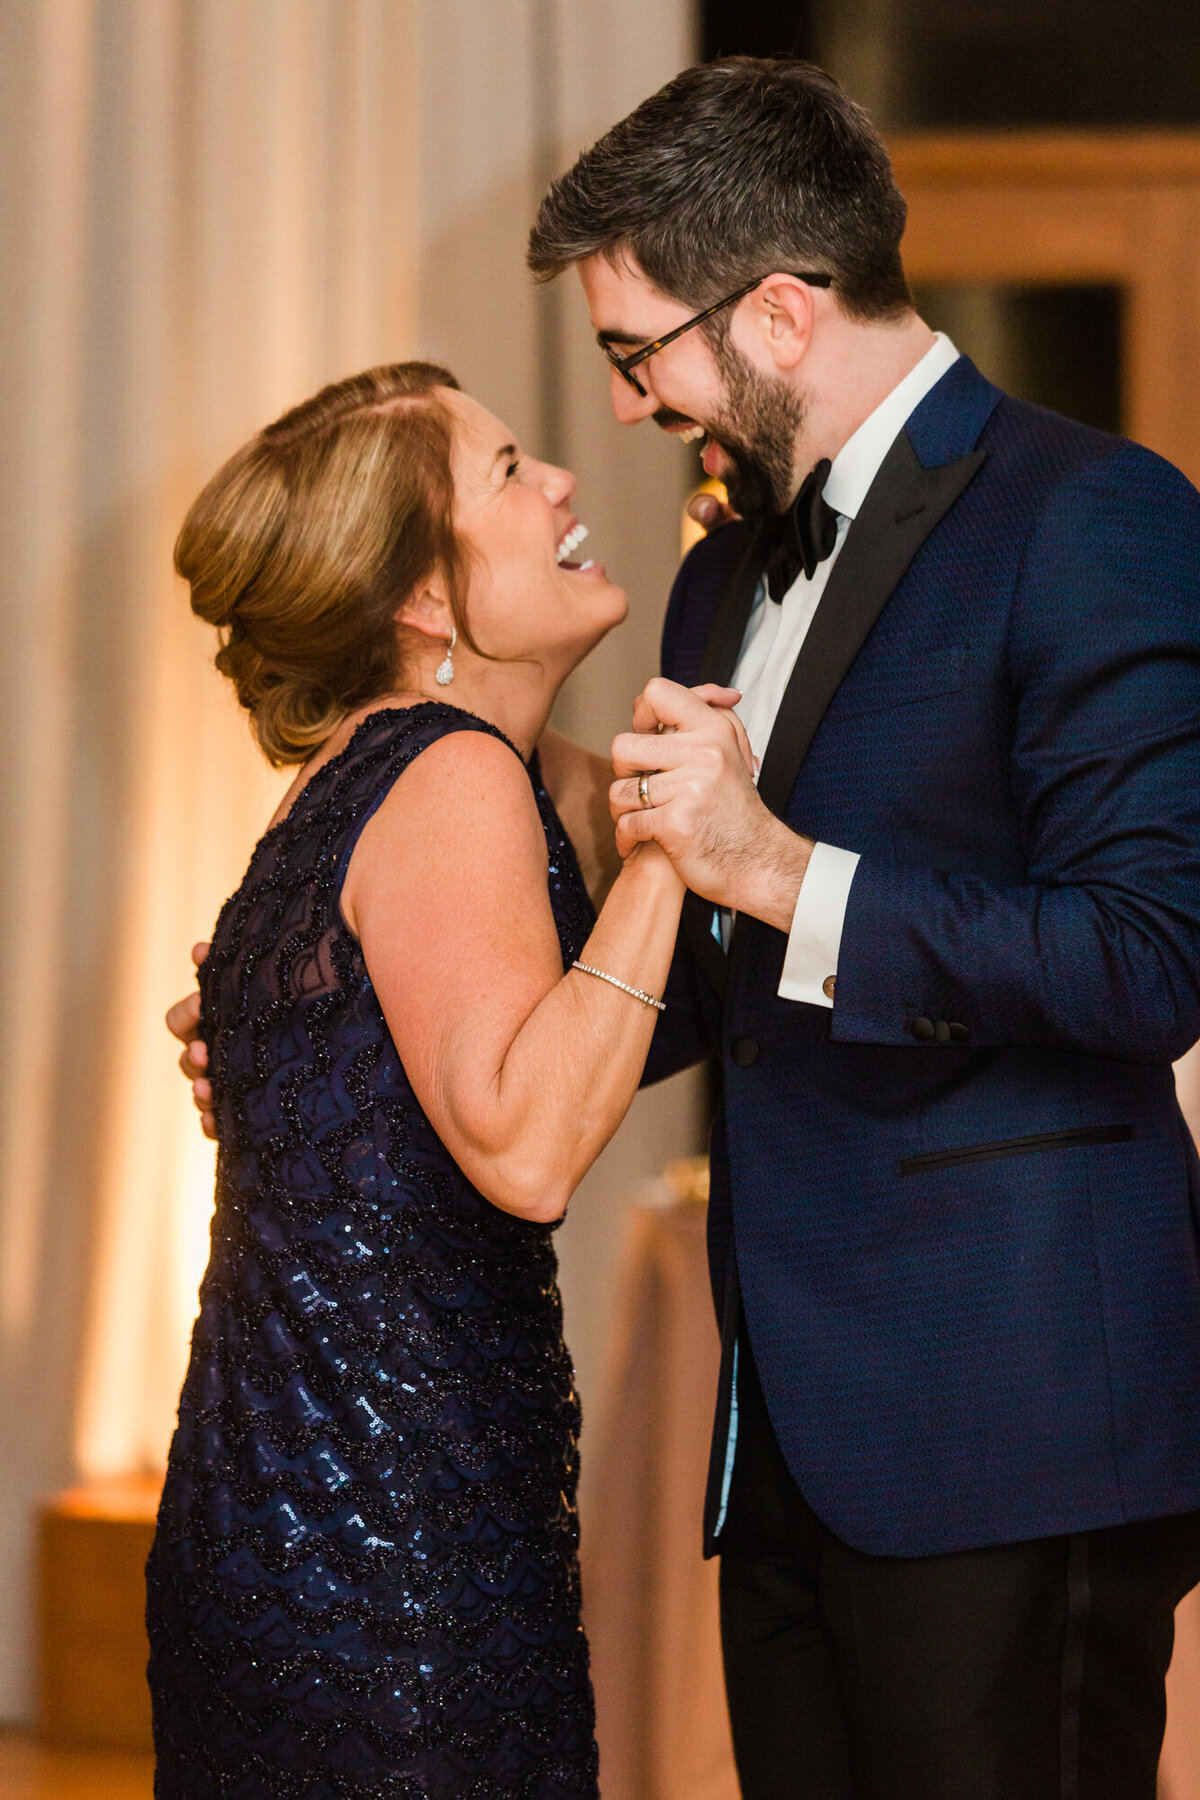 A mother shares a special dance with her son on his wedding day at the Ivy Room in Chicago